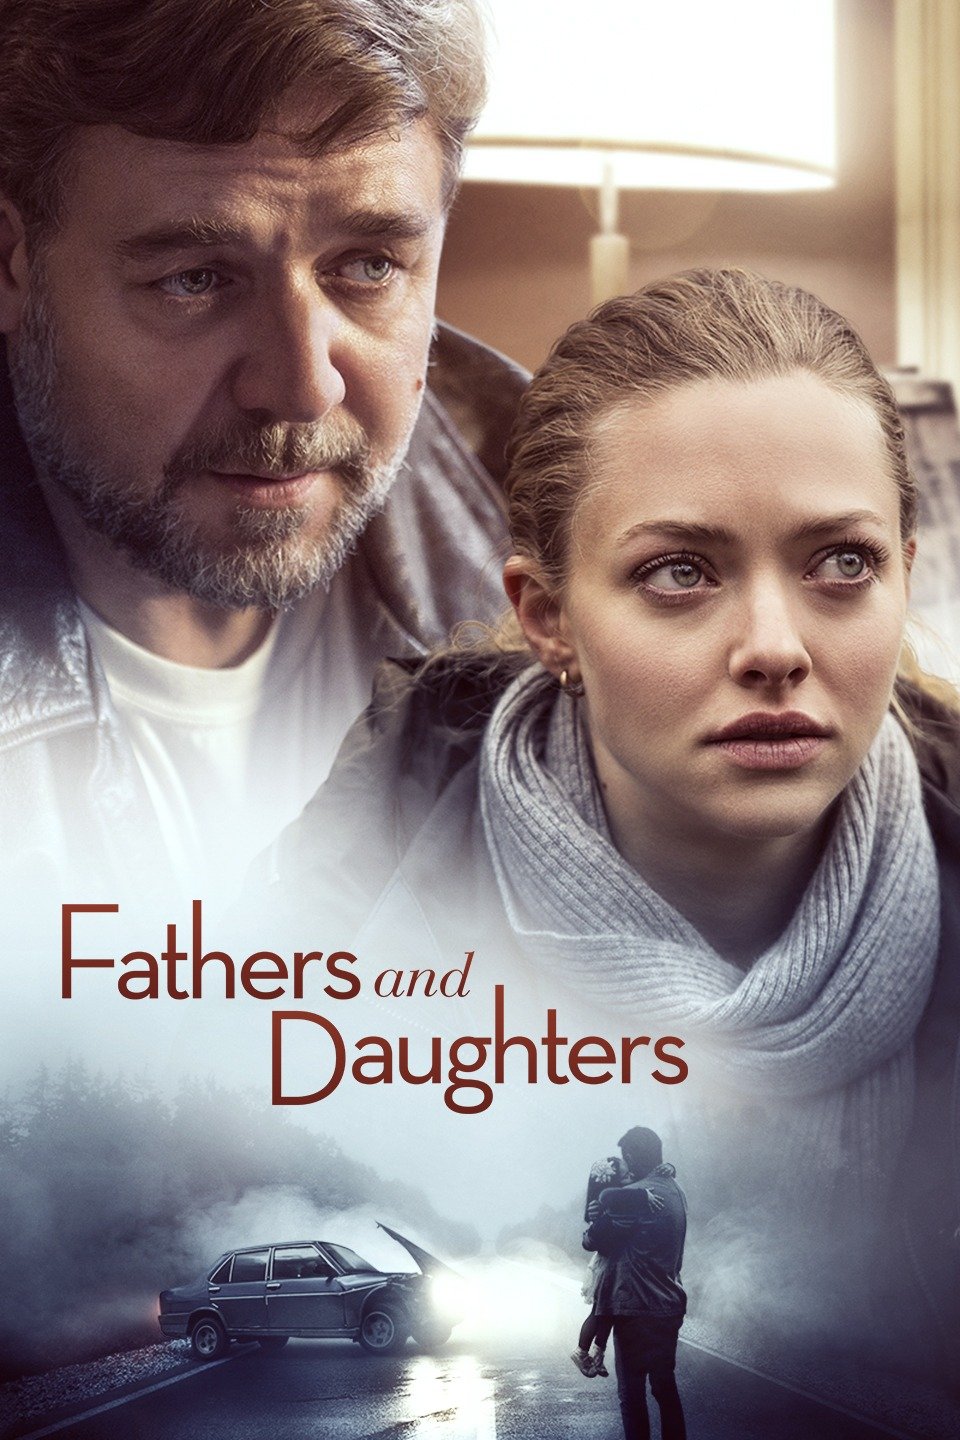 Sleeping Dotor Ded Sex Hd Rep Sex Hd - Fathers and Daughters - Rotten Tomatoes